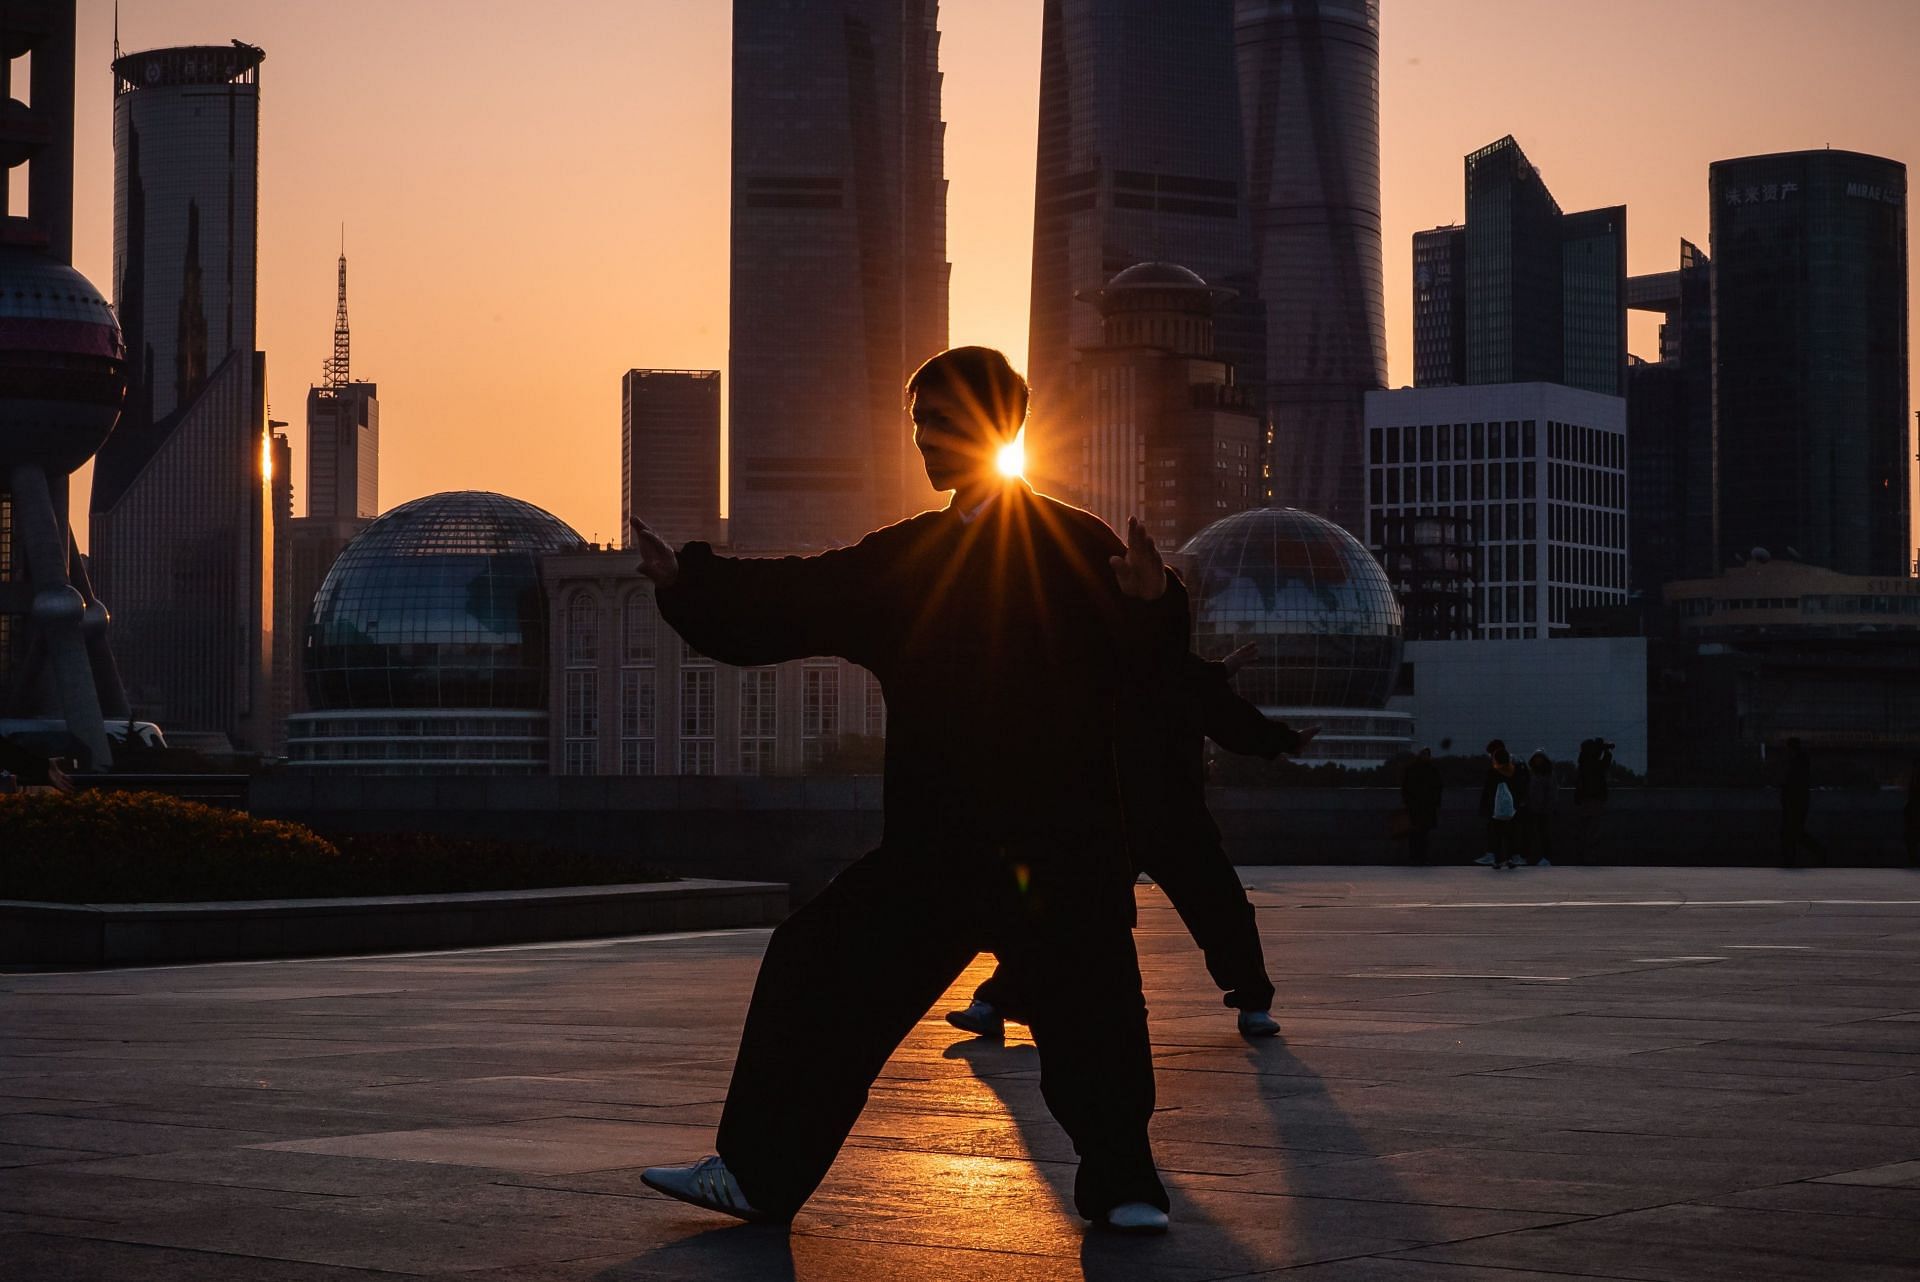 Tai Chi is a gentle exercise that improves balance, flexibility and strength.(Image via Unsplash/Kevin Olson)